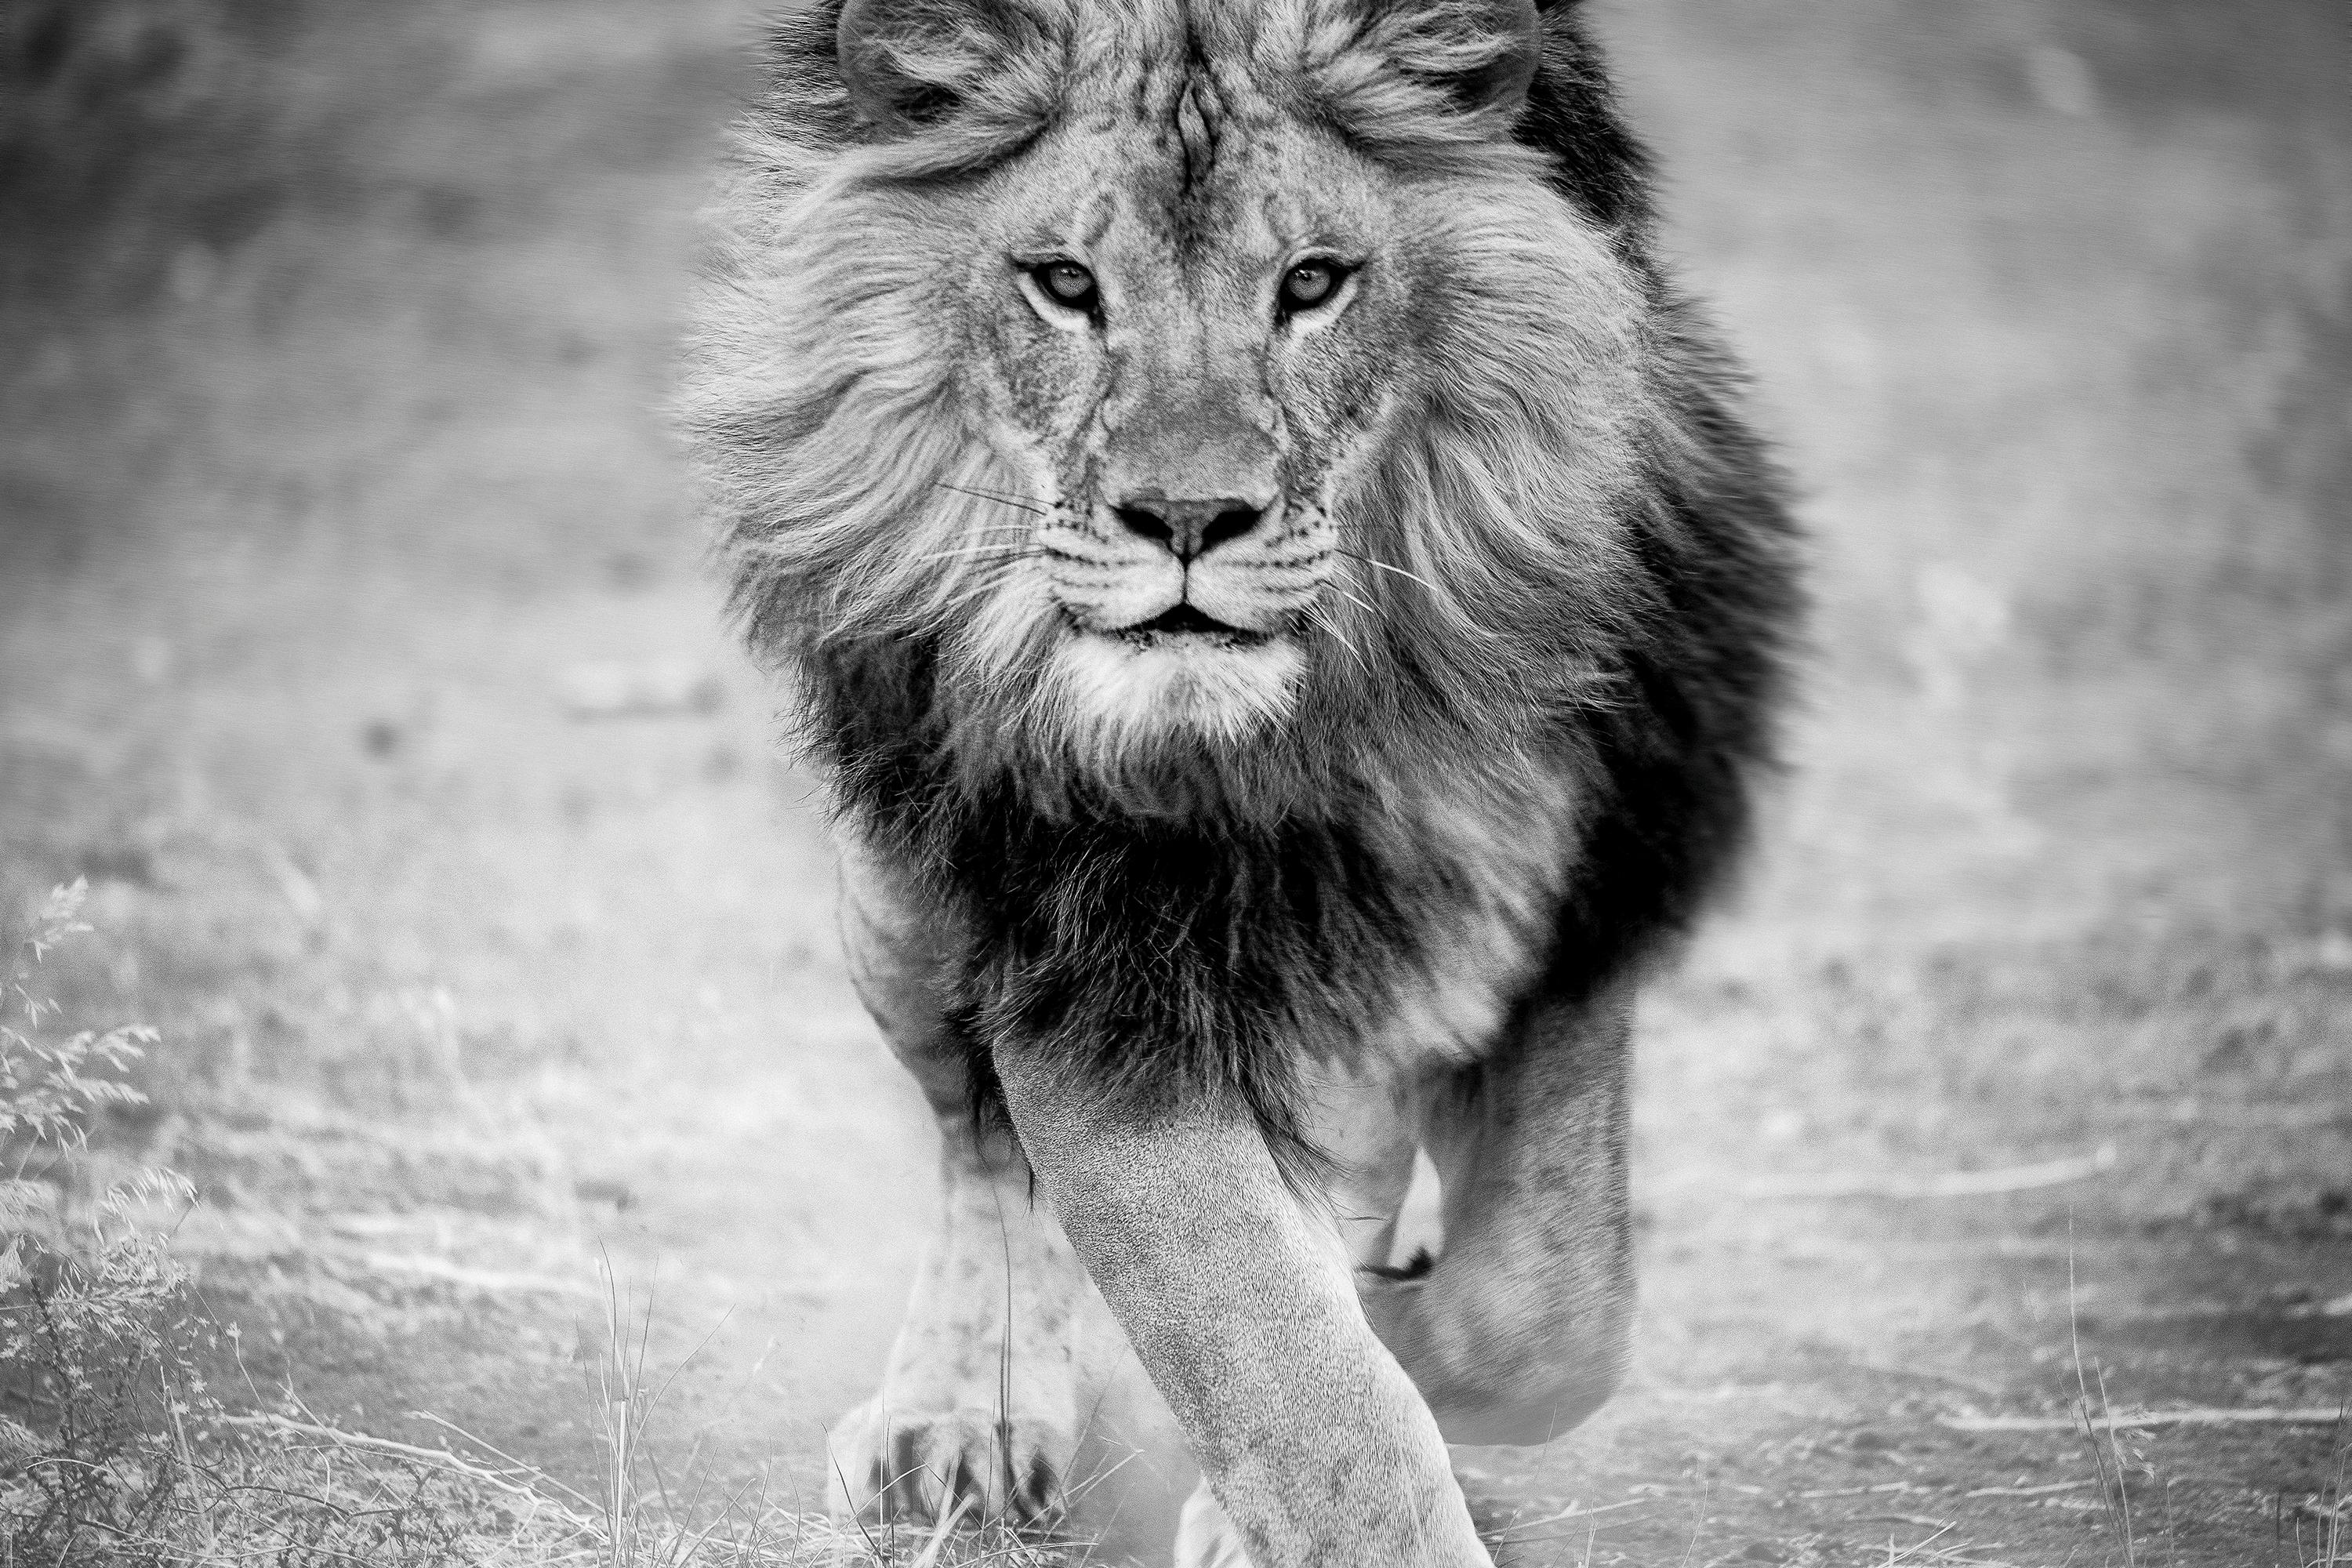 Shane Russeck Animal Print - Black and White Lion Photography, Panthera Leo - 40x60, Lion Photograph Unsigned